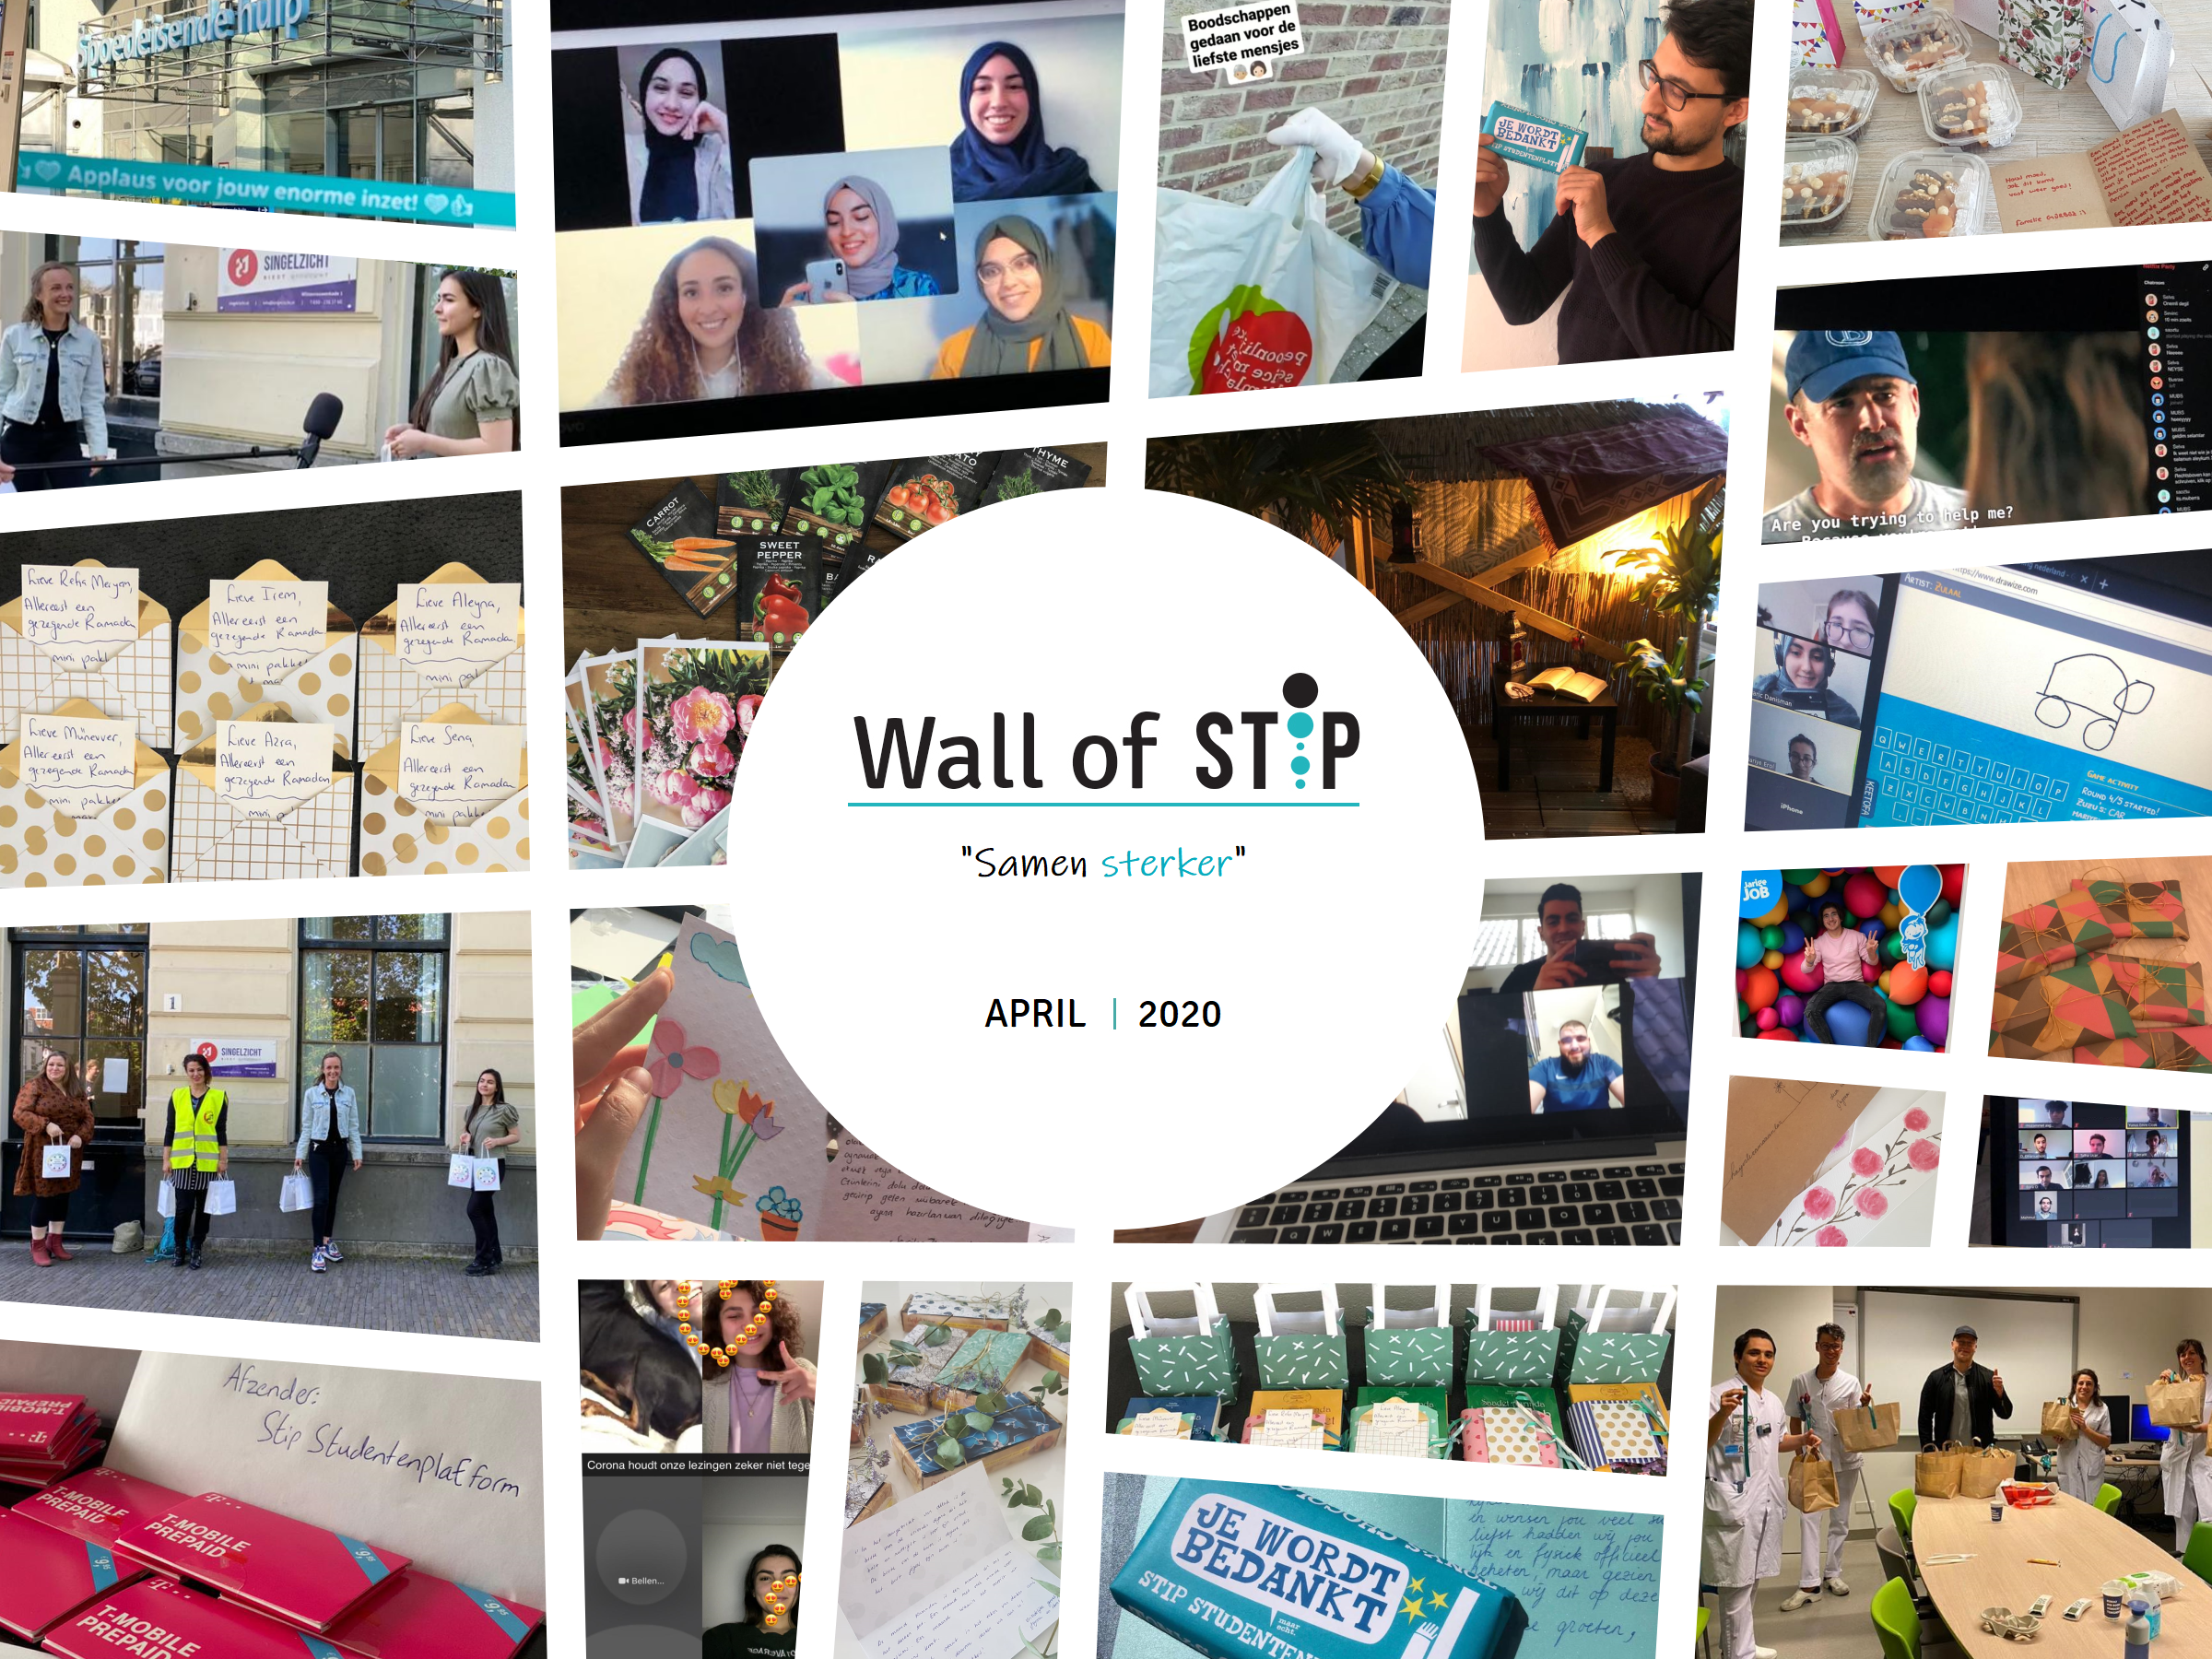 Wall of Stip - April 2020